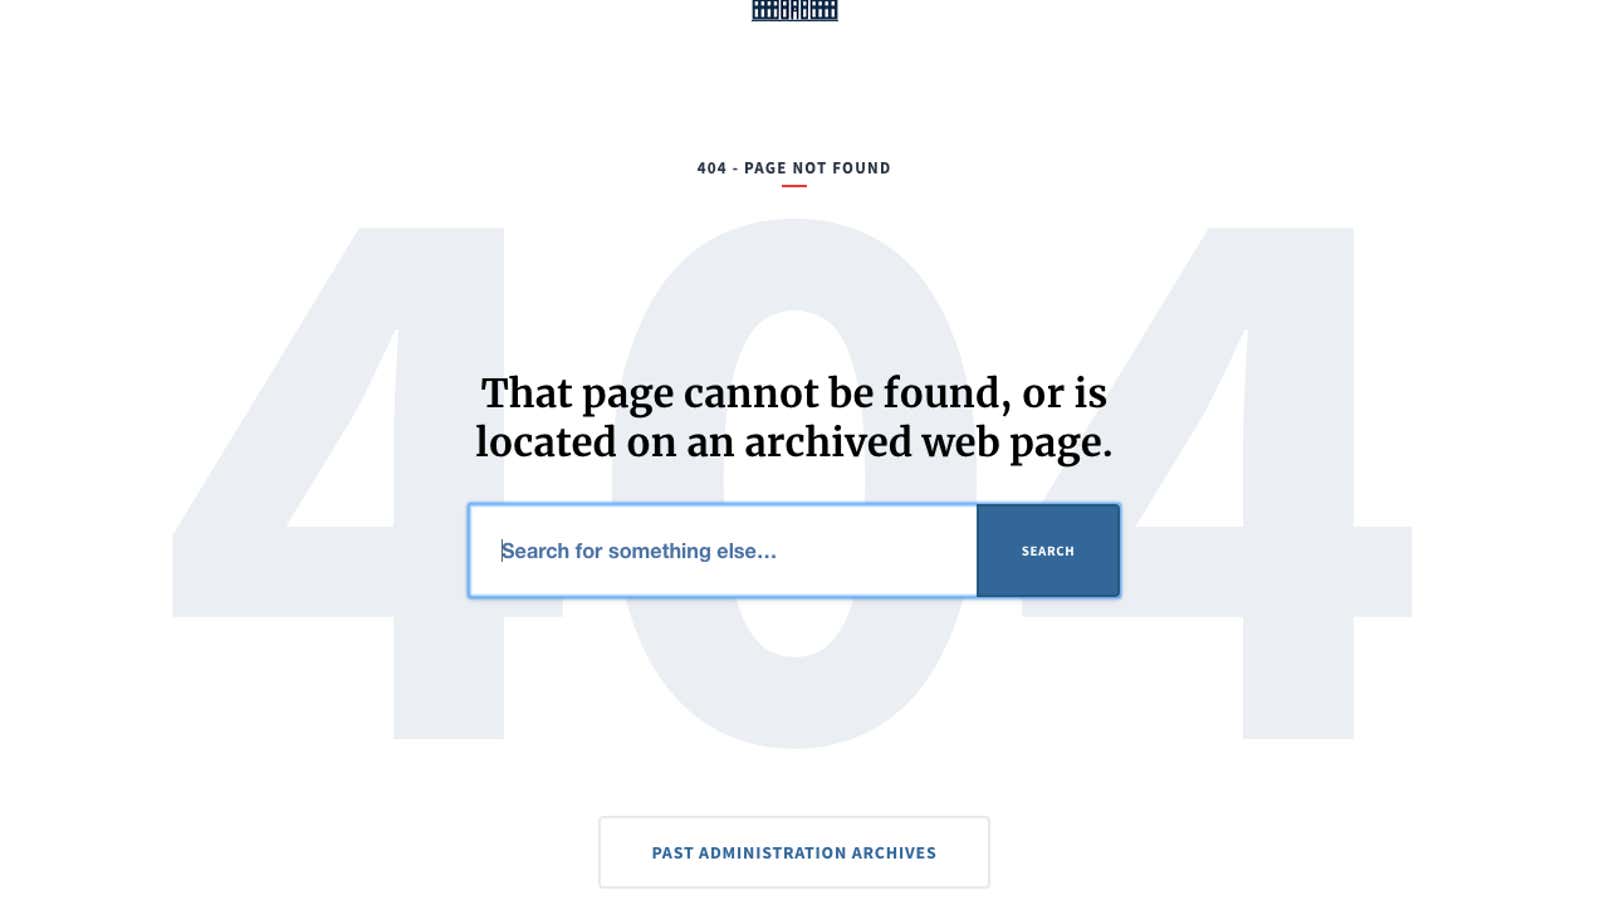 Error message on the daily archive’s URL, captured on Sept. 11, 2018.